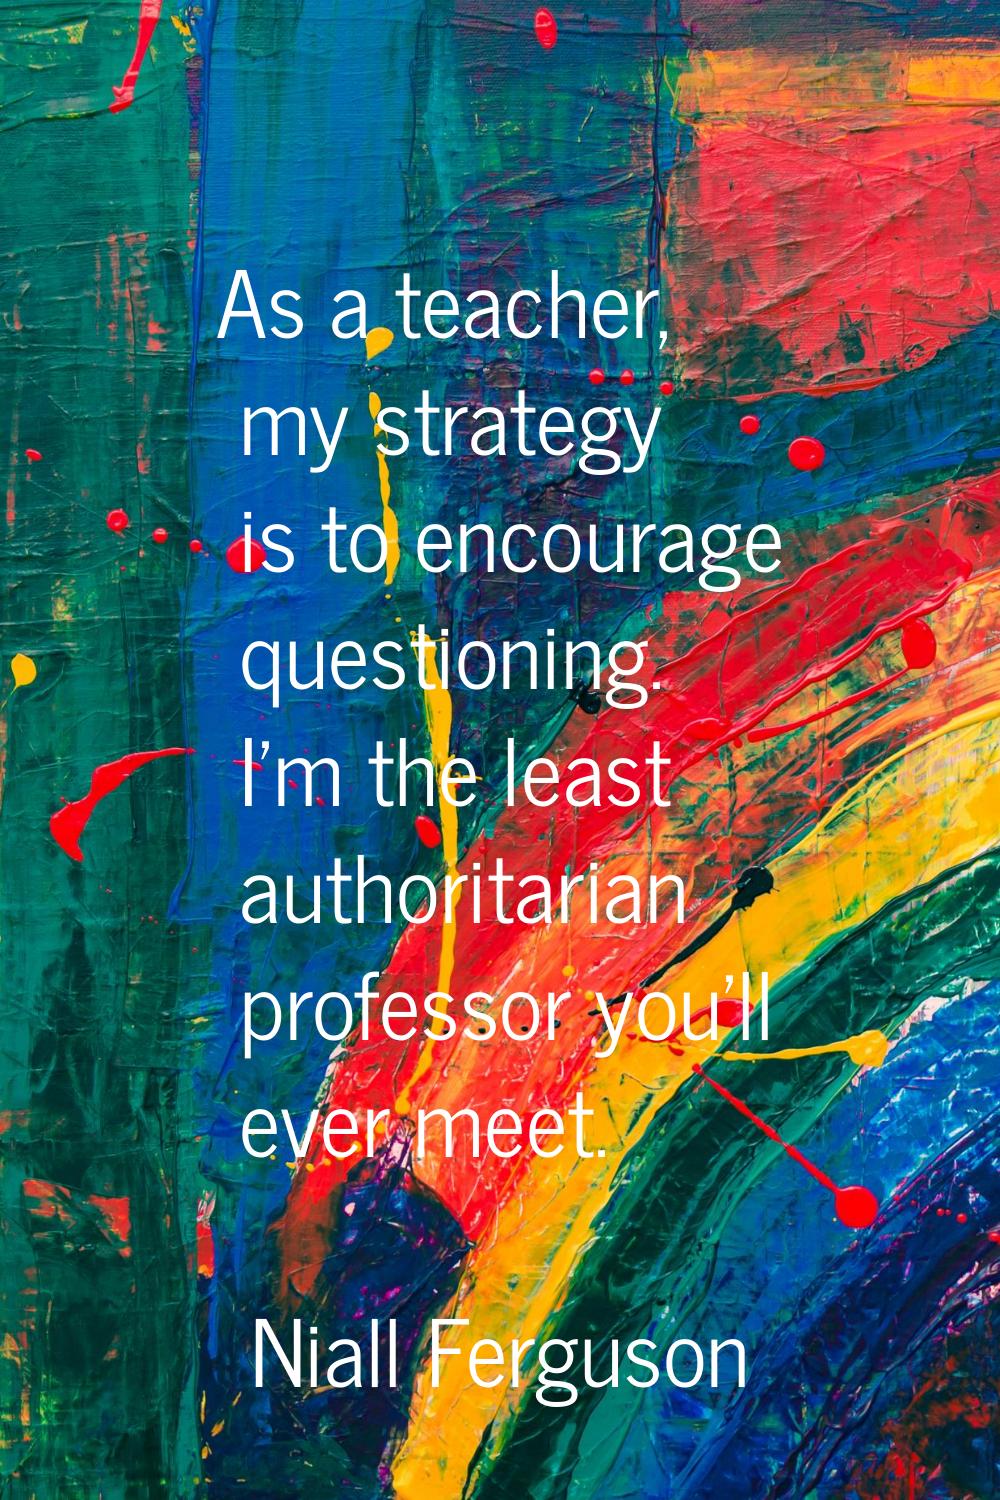 As a teacher, my strategy is to encourage questioning. I'm the least authoritarian professor you'll